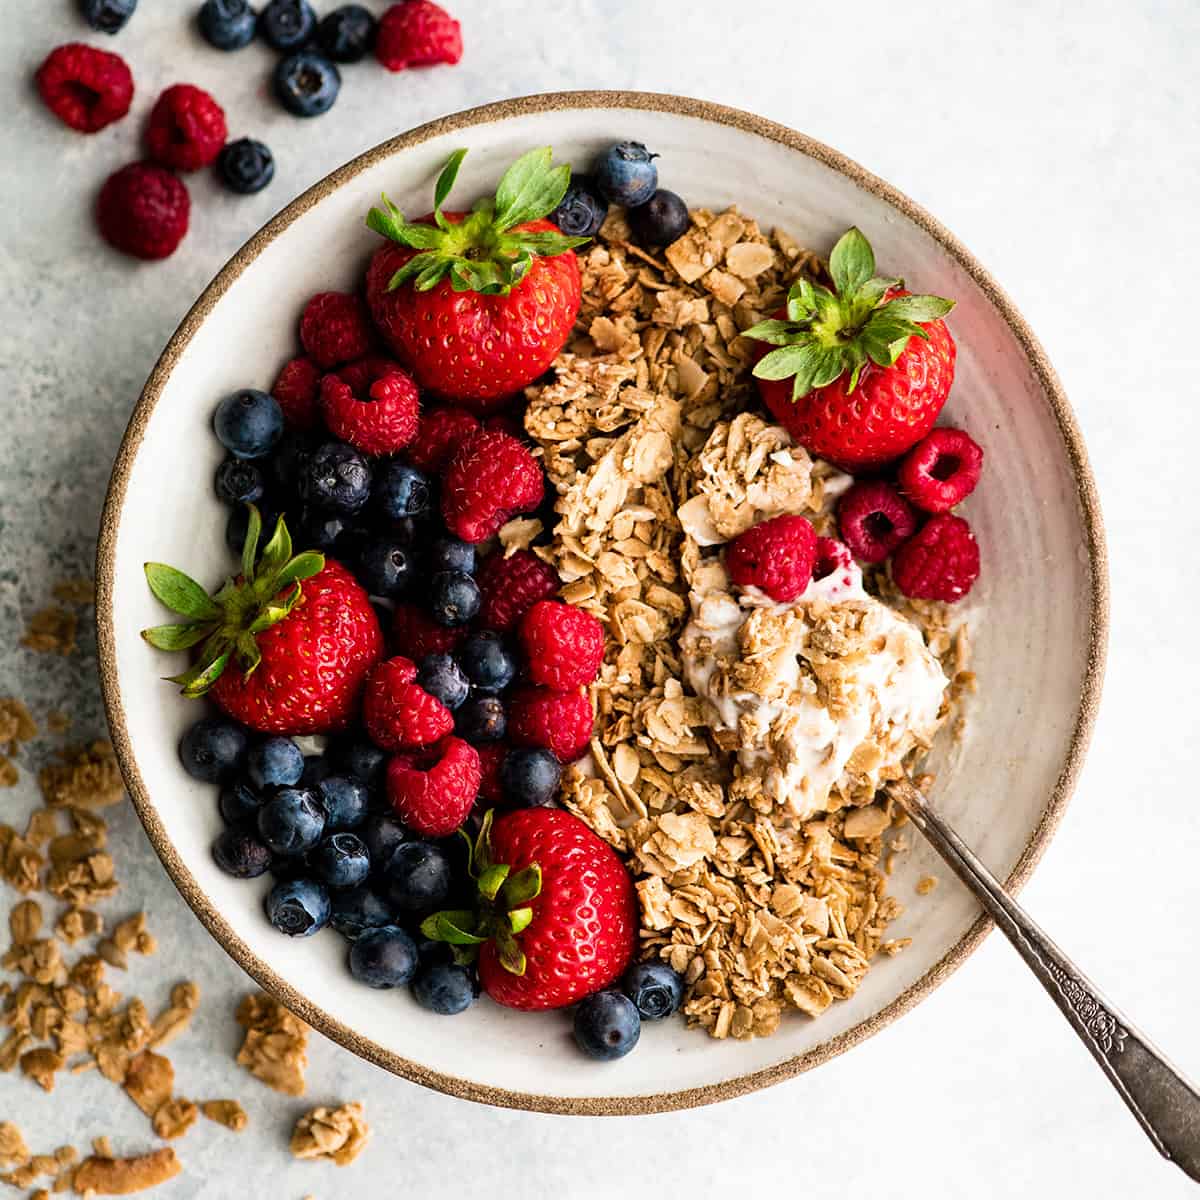 a bowl of healthy homemade granola over yogurt with berries and a spoon taking a bite out of it